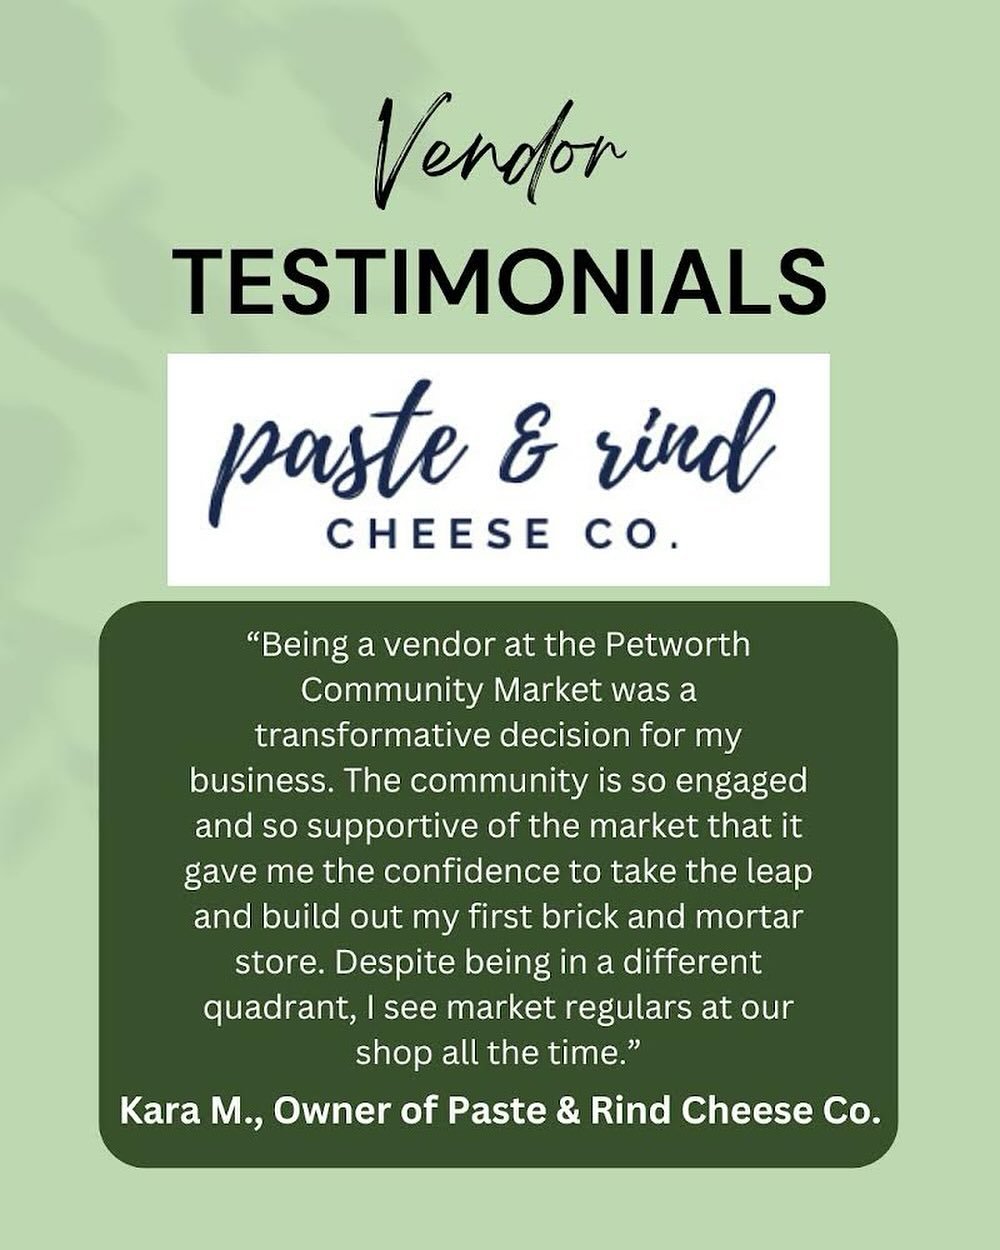 Grateful for the glowing review from one of our amazing vendors, @pasteandrind 🌟 #testimonialtuesday #petworth #farmersmarket #washingtondc